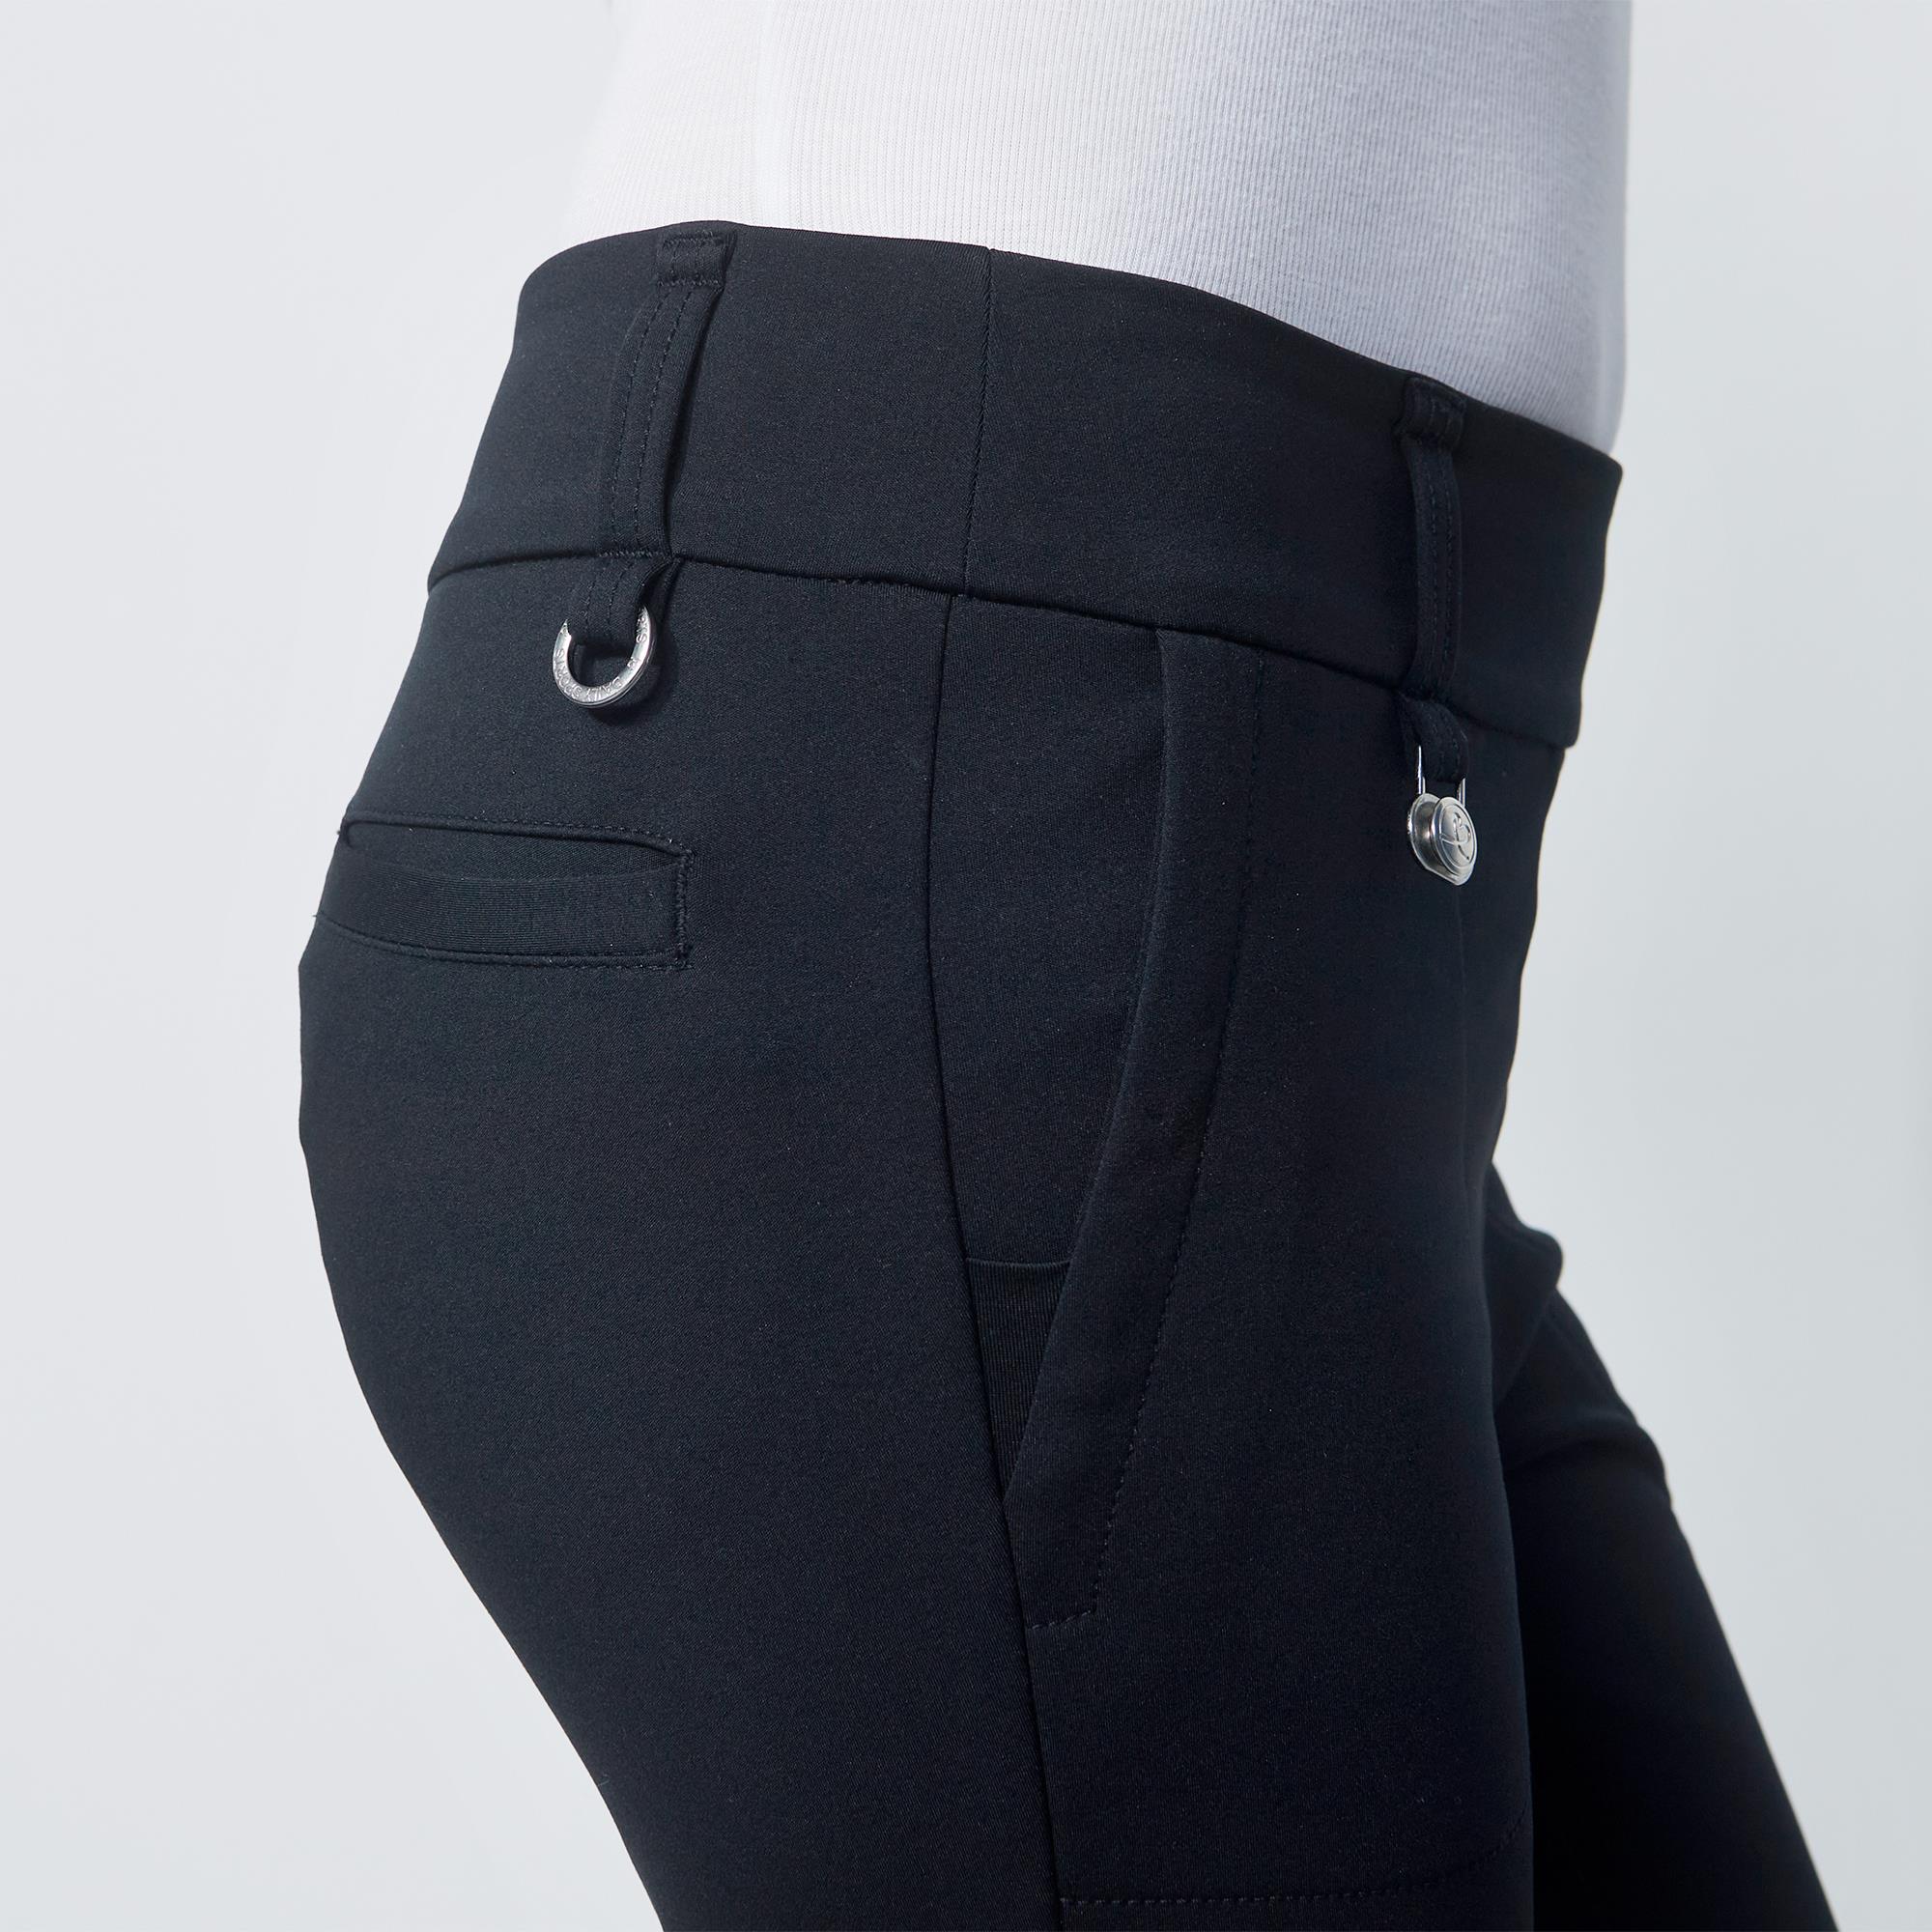 Daily Sports add Winter Warm MAGIC pants to their comprehensive collection